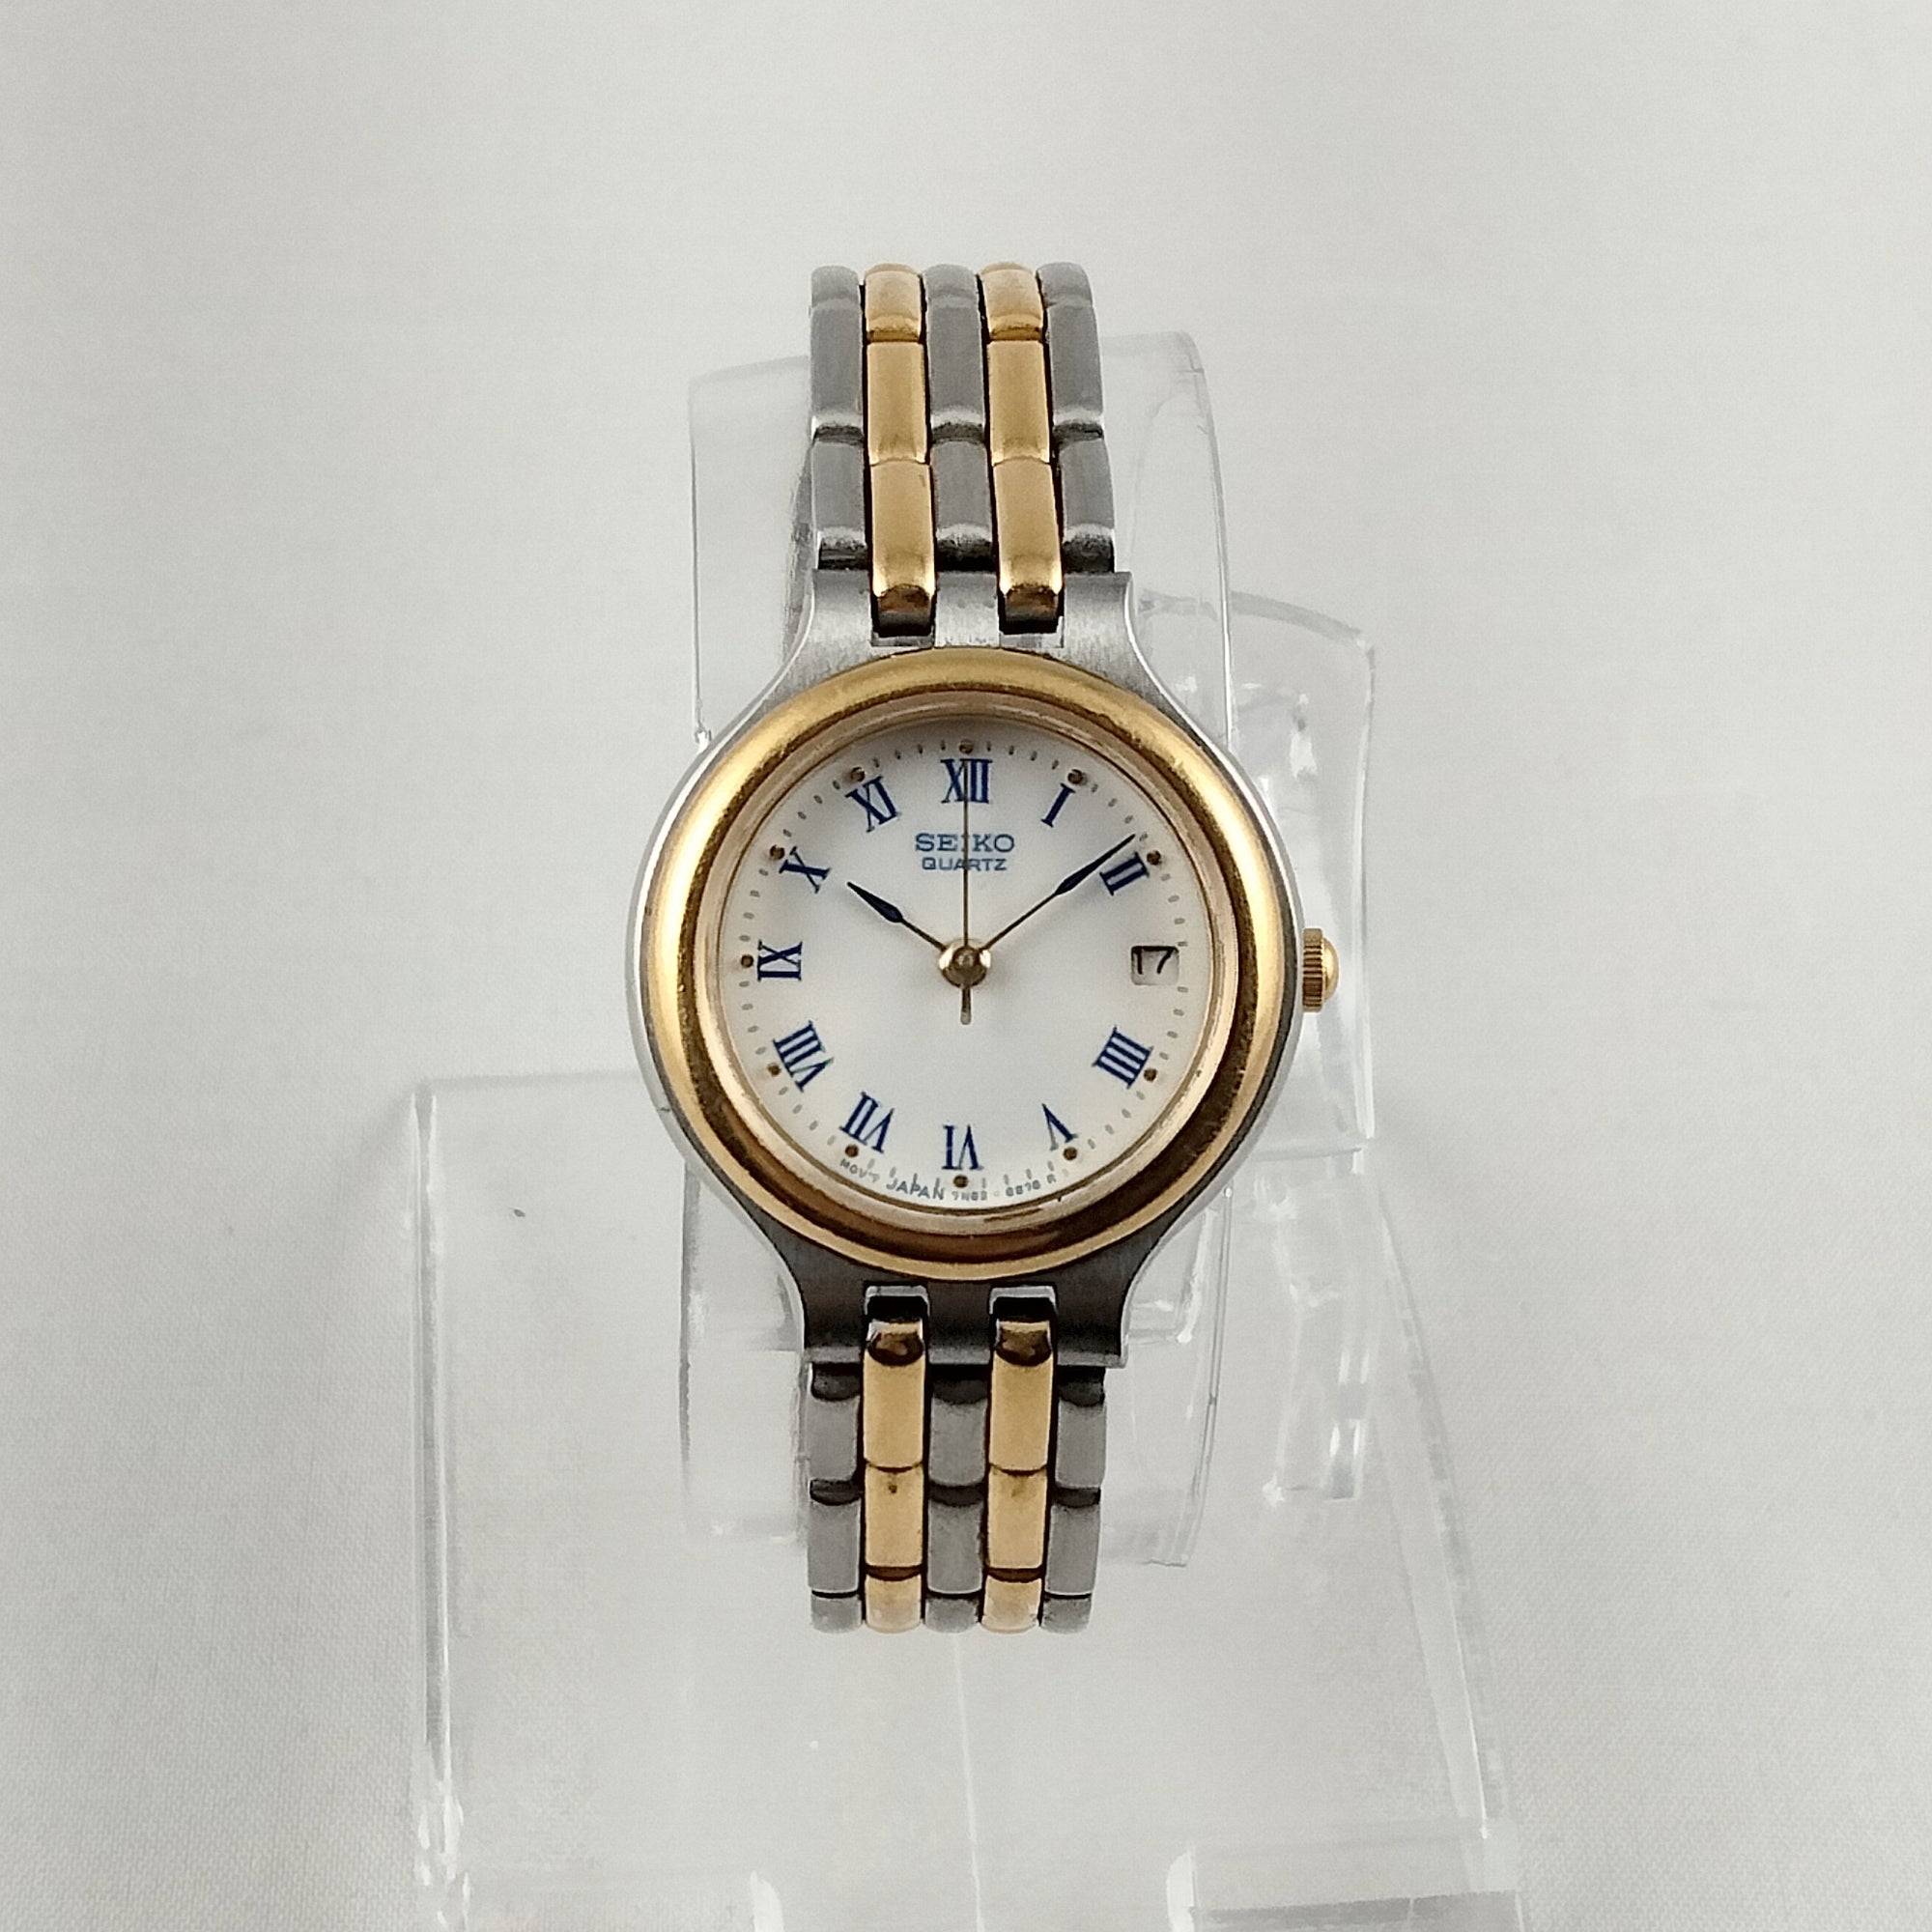 Seiko Unisex Silver and Gold Tone Watch, Navy Dial Details, Bracelet Strap